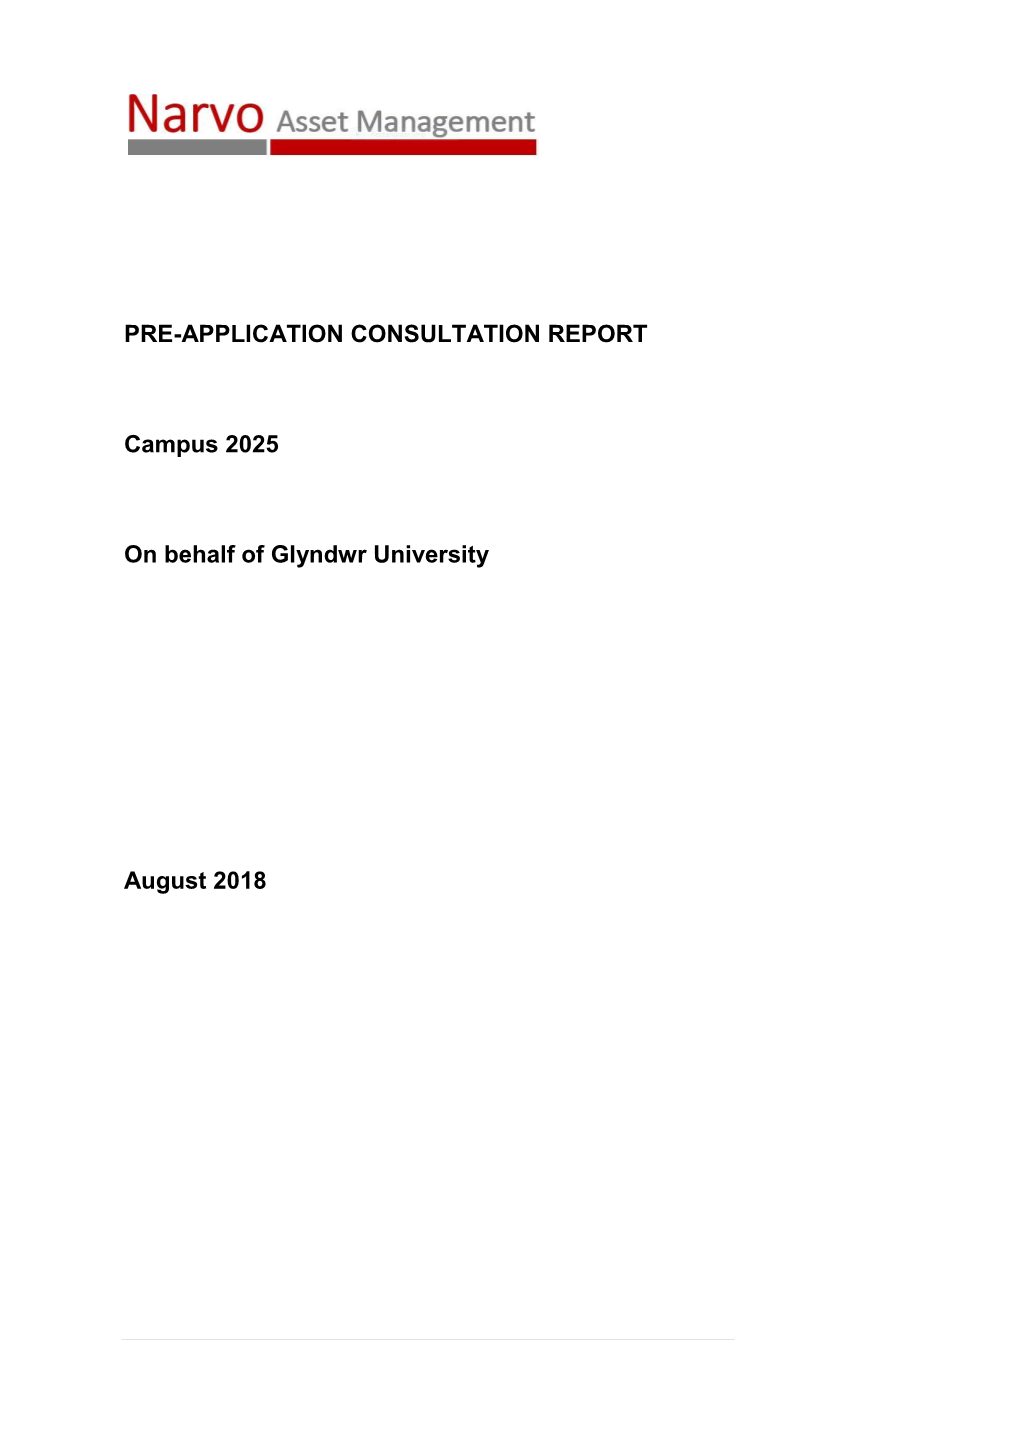 PRE-APPLICATION CONSULTATION REPORT Campus 2025 on Behalf of Glyndwr University August 2018